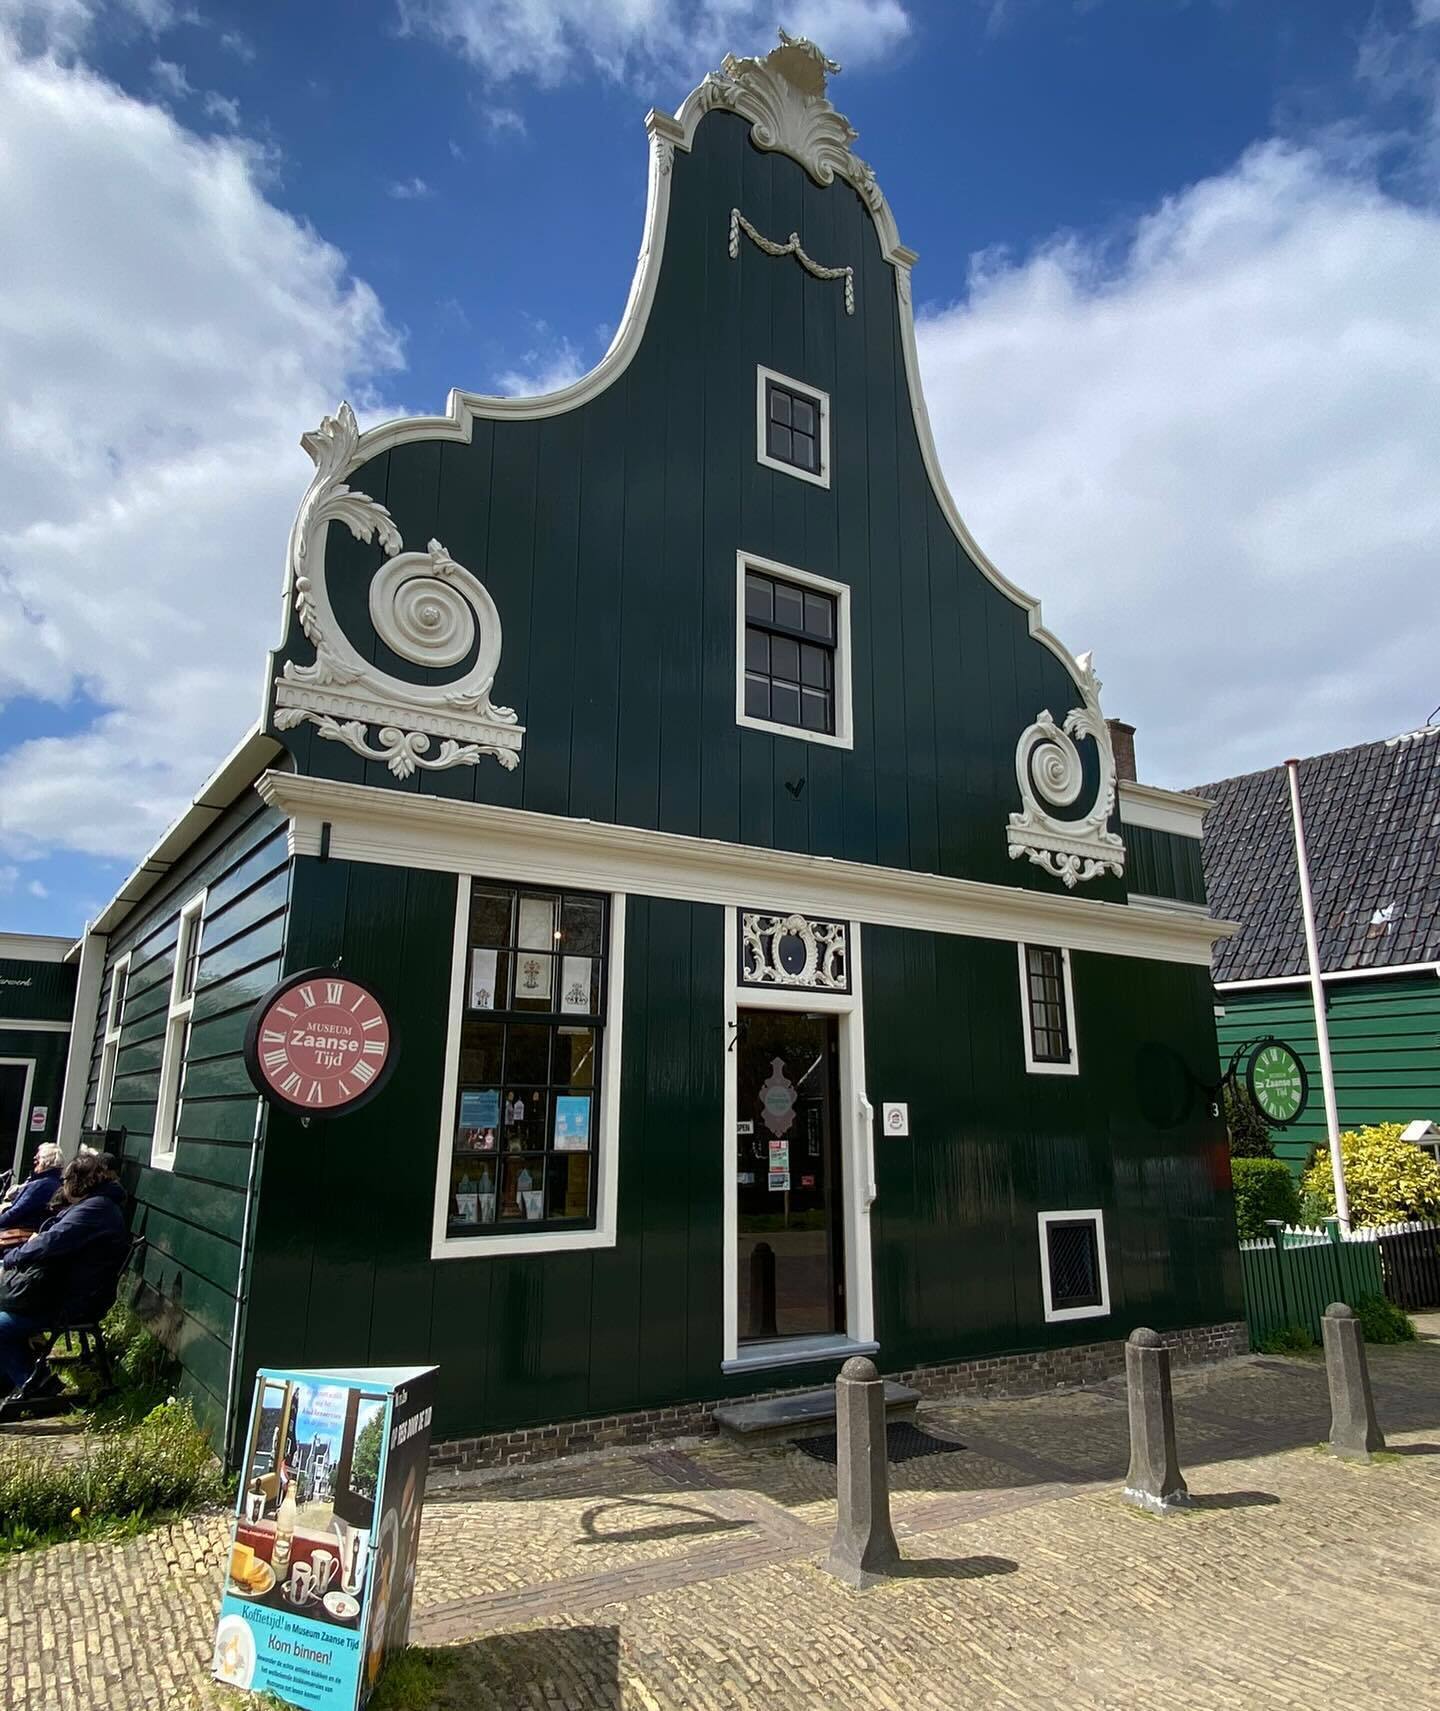 Beyond Amsterdam: discover unfamiliar corners of the Netherlands